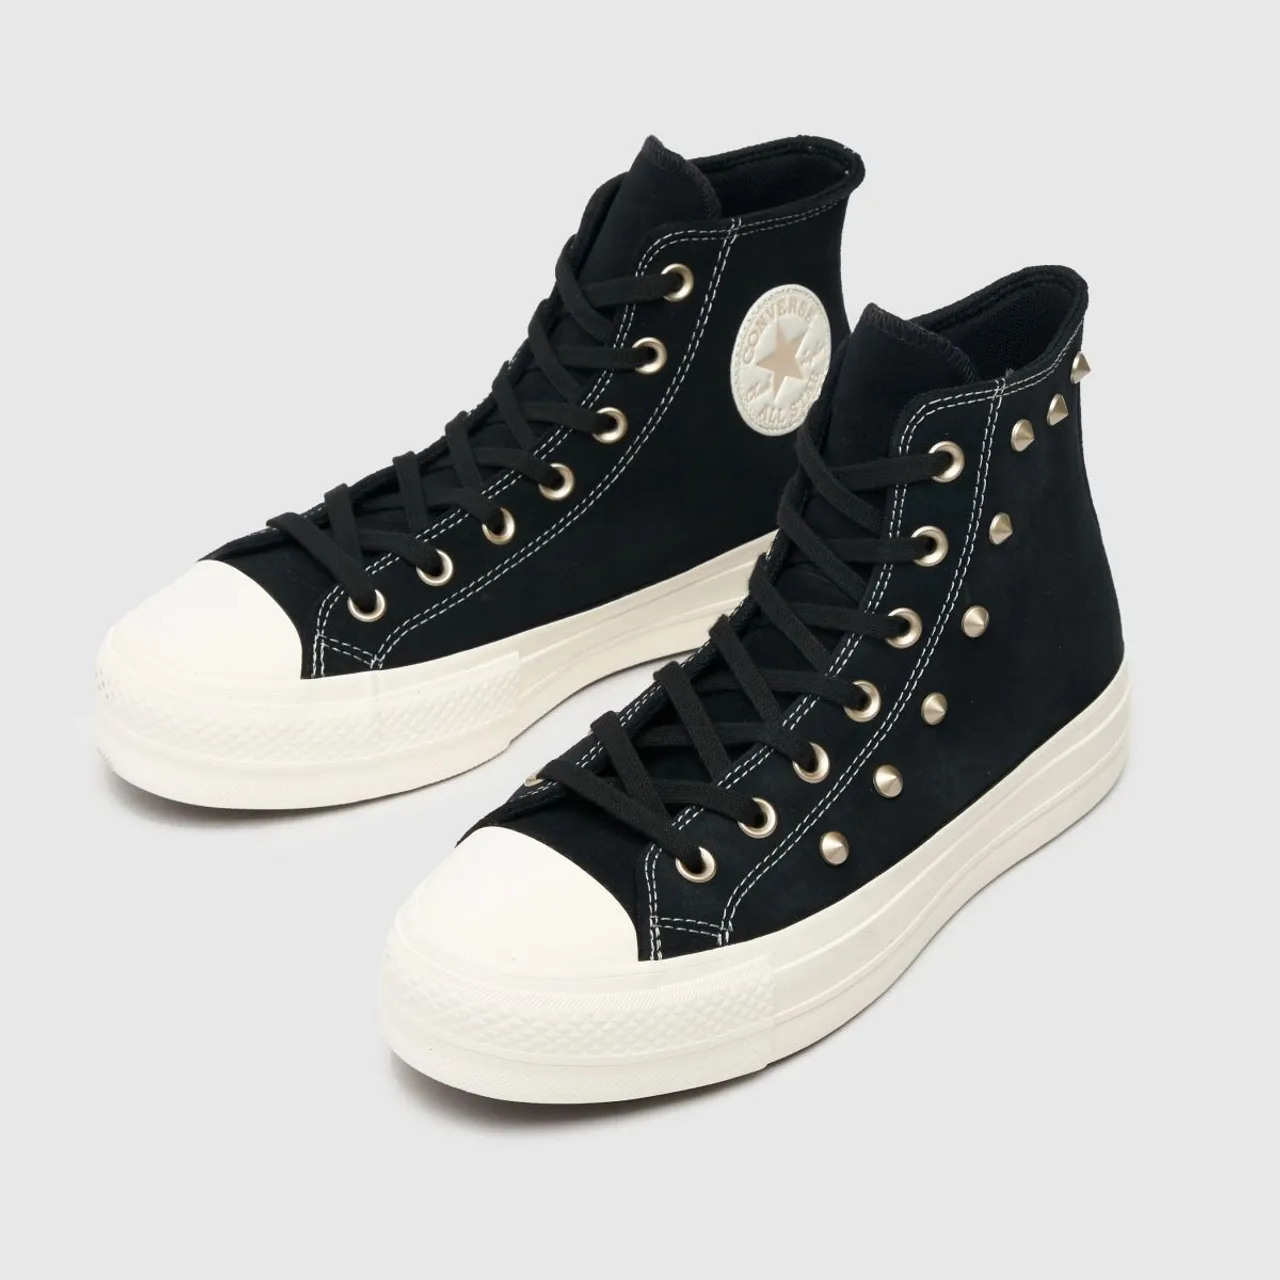 Converse All Star Lift Studded Trainers In Black & Gold